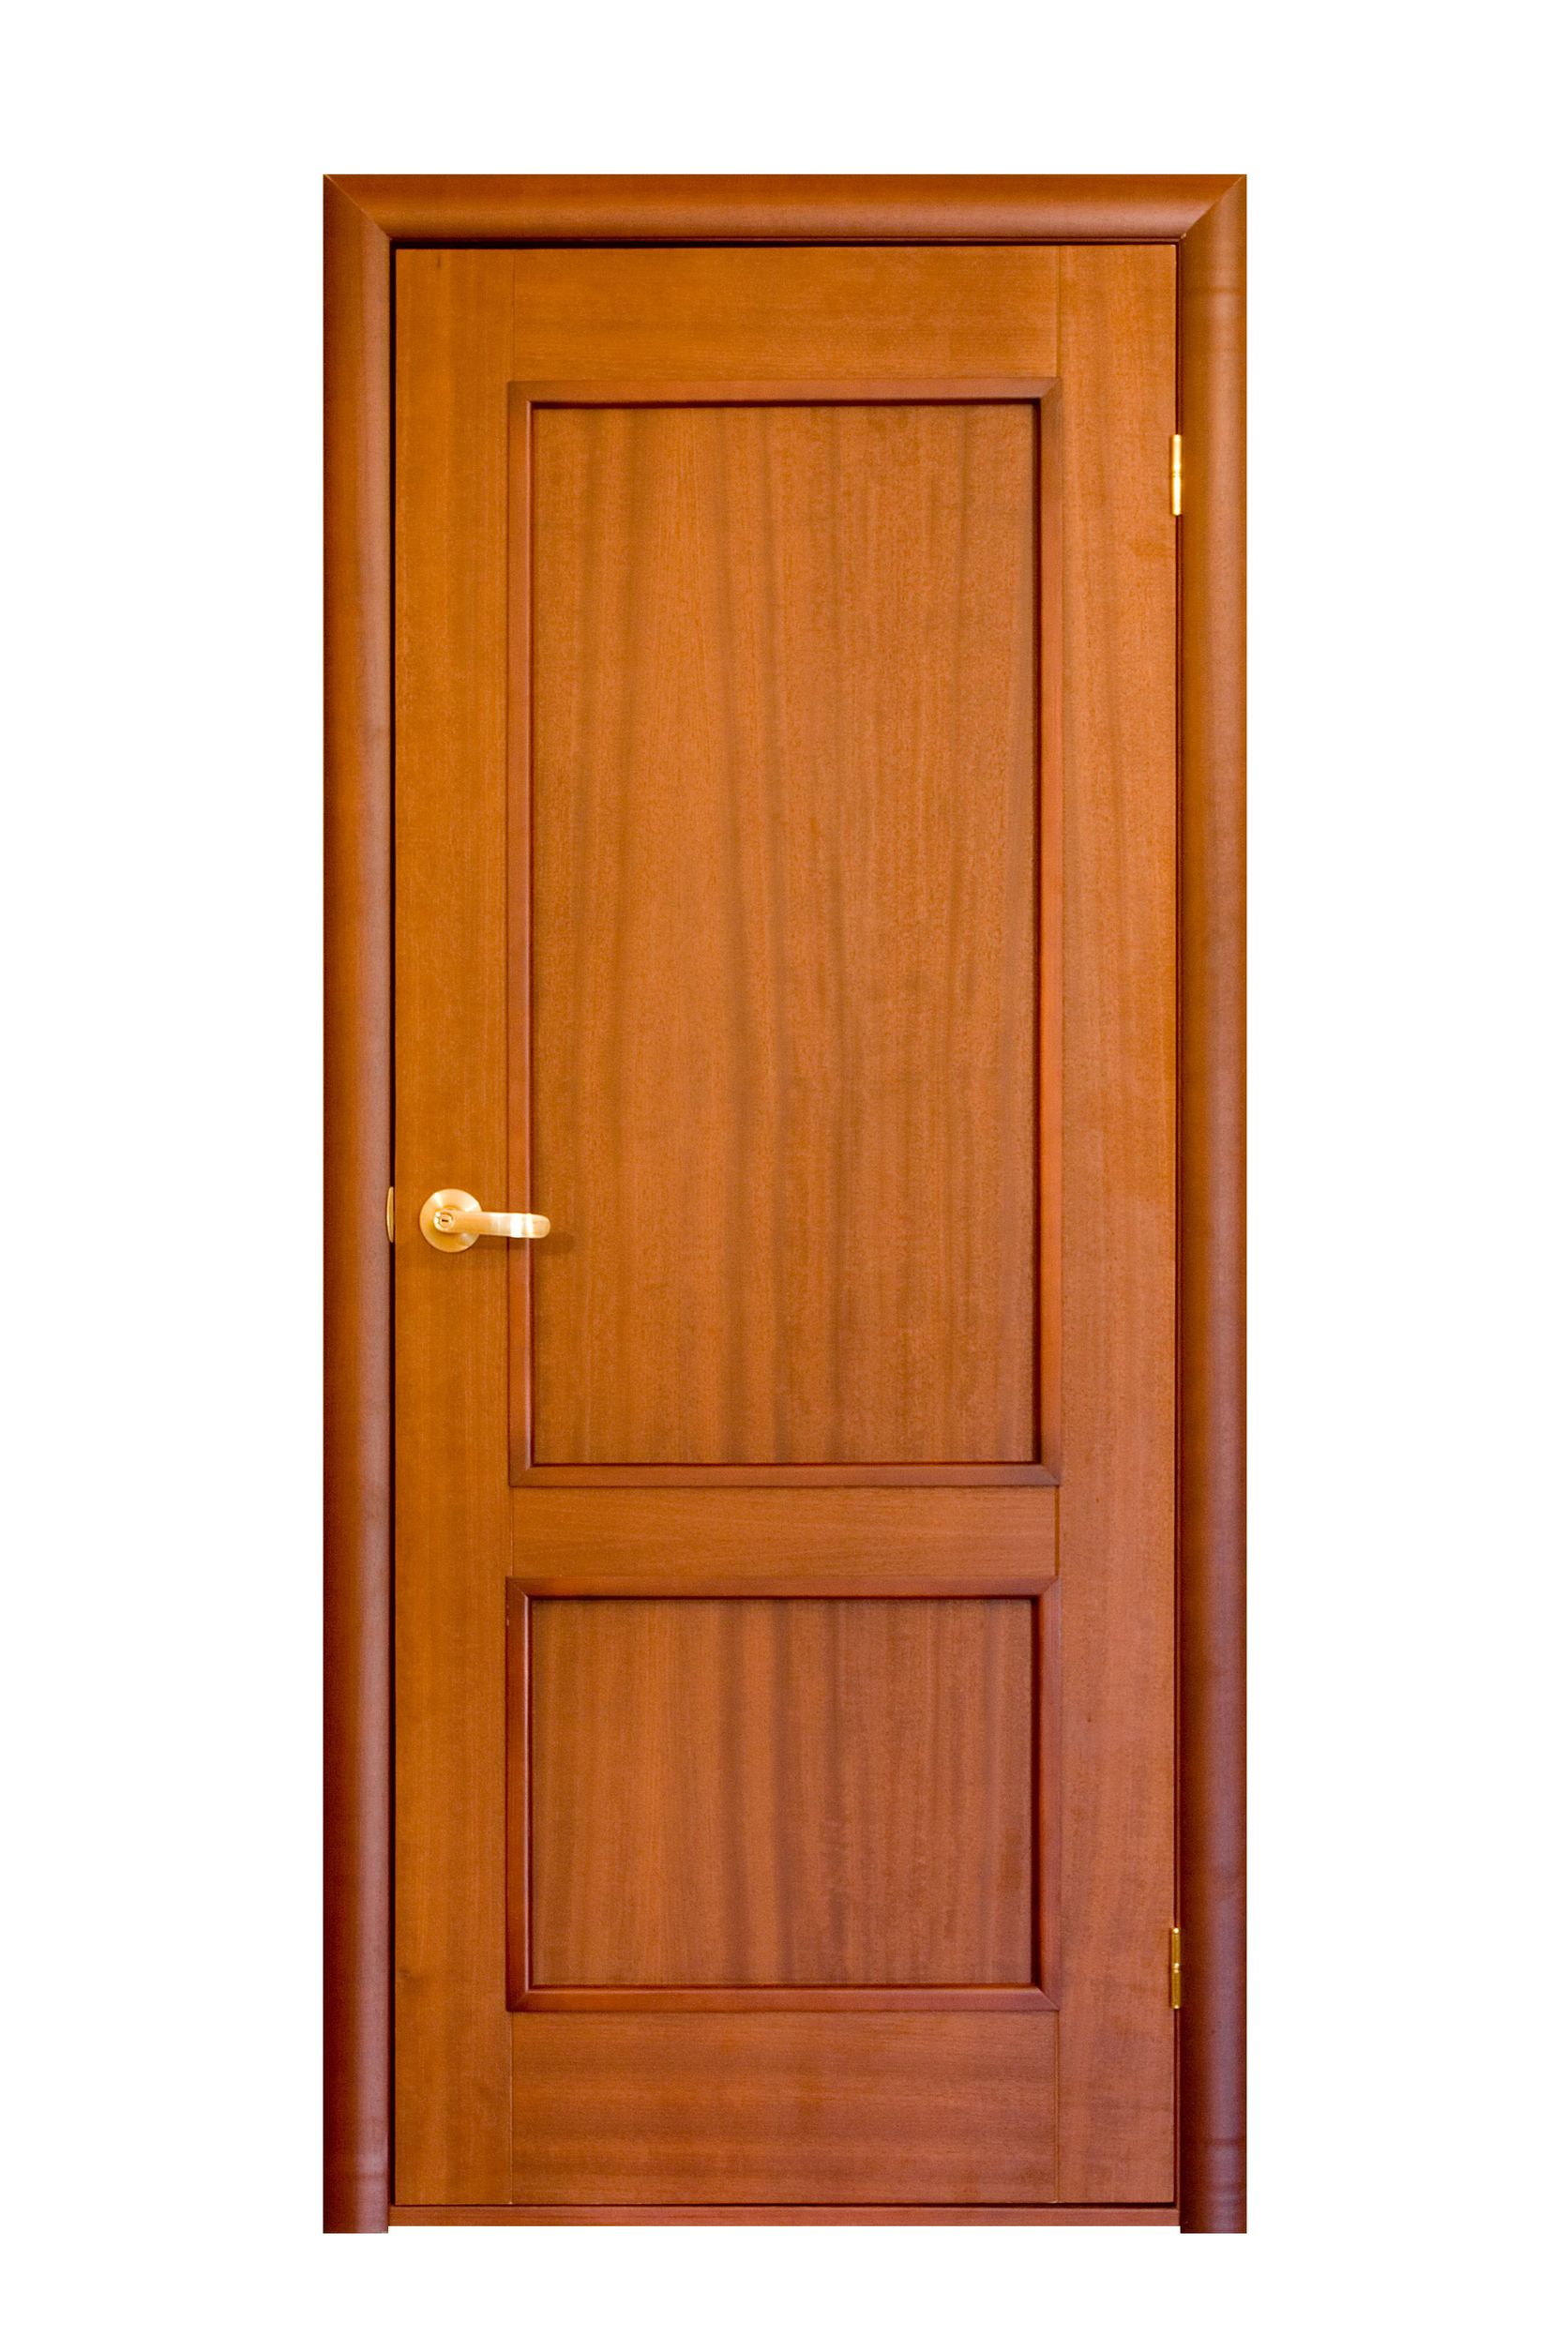 How to Choose Moulding for Doors in San Diego, CA